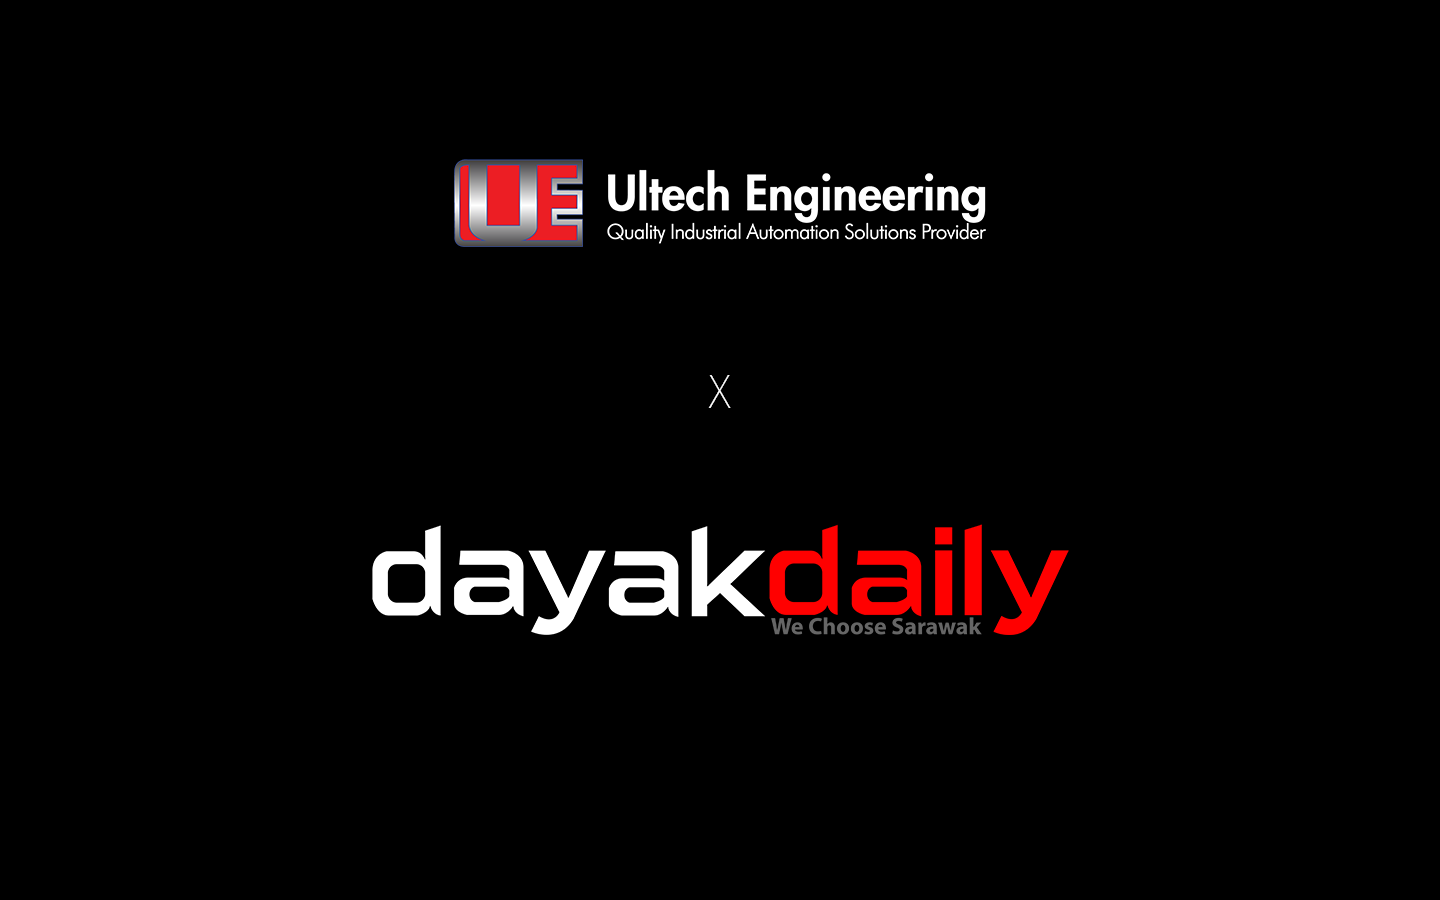 Ultech Engineering Receives Exclusive Invitation from dayakdaily to Sunday Morning Dialogue Session with Sarawak Premier